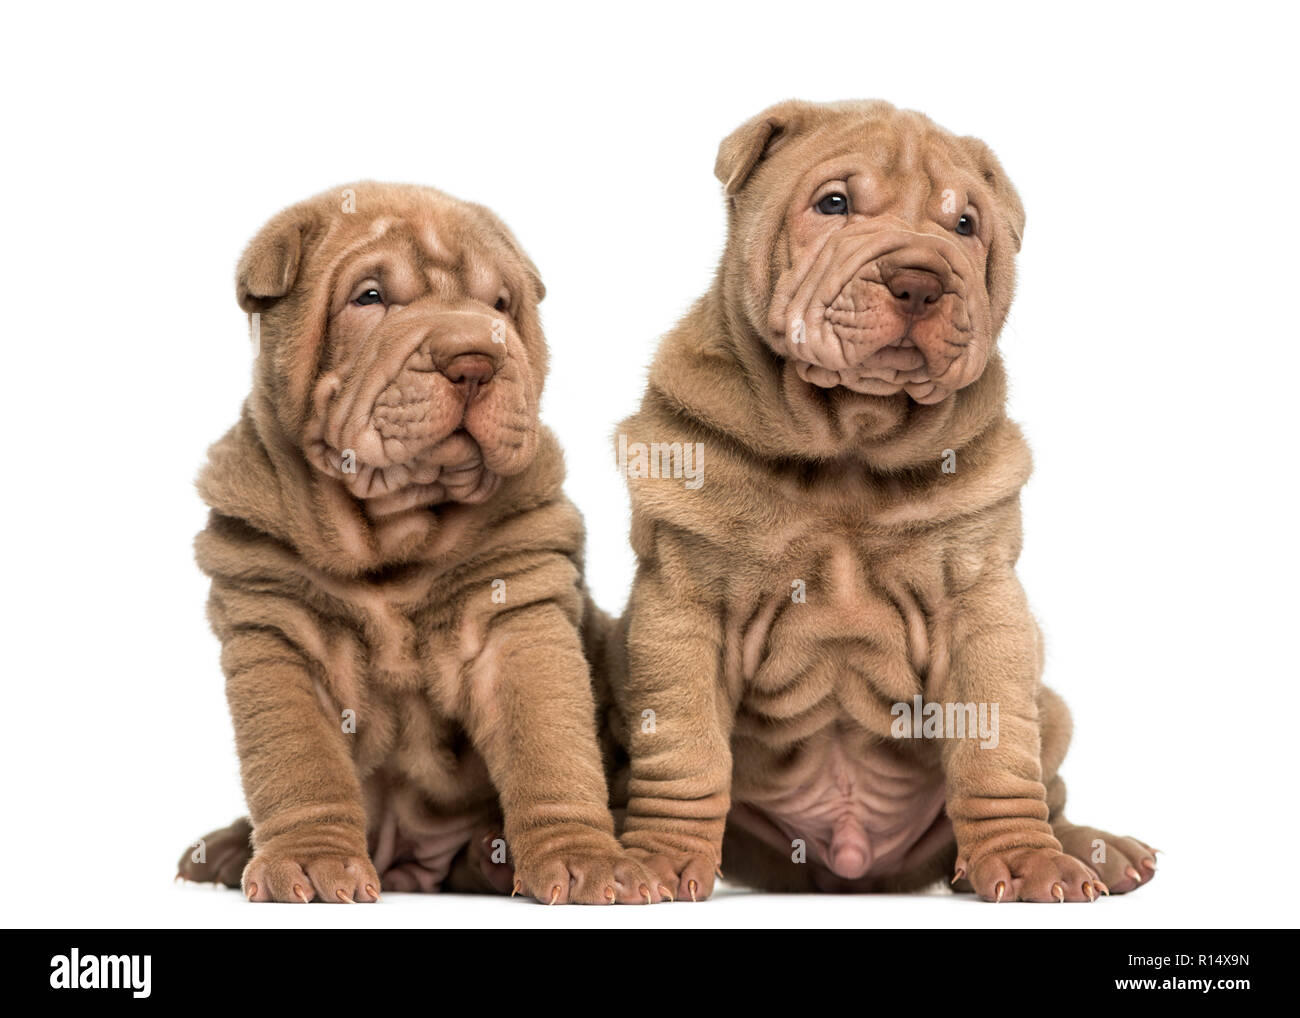 Two Shar Pei Puppies Sitting Together Isolated On White Stock Photo Alamy